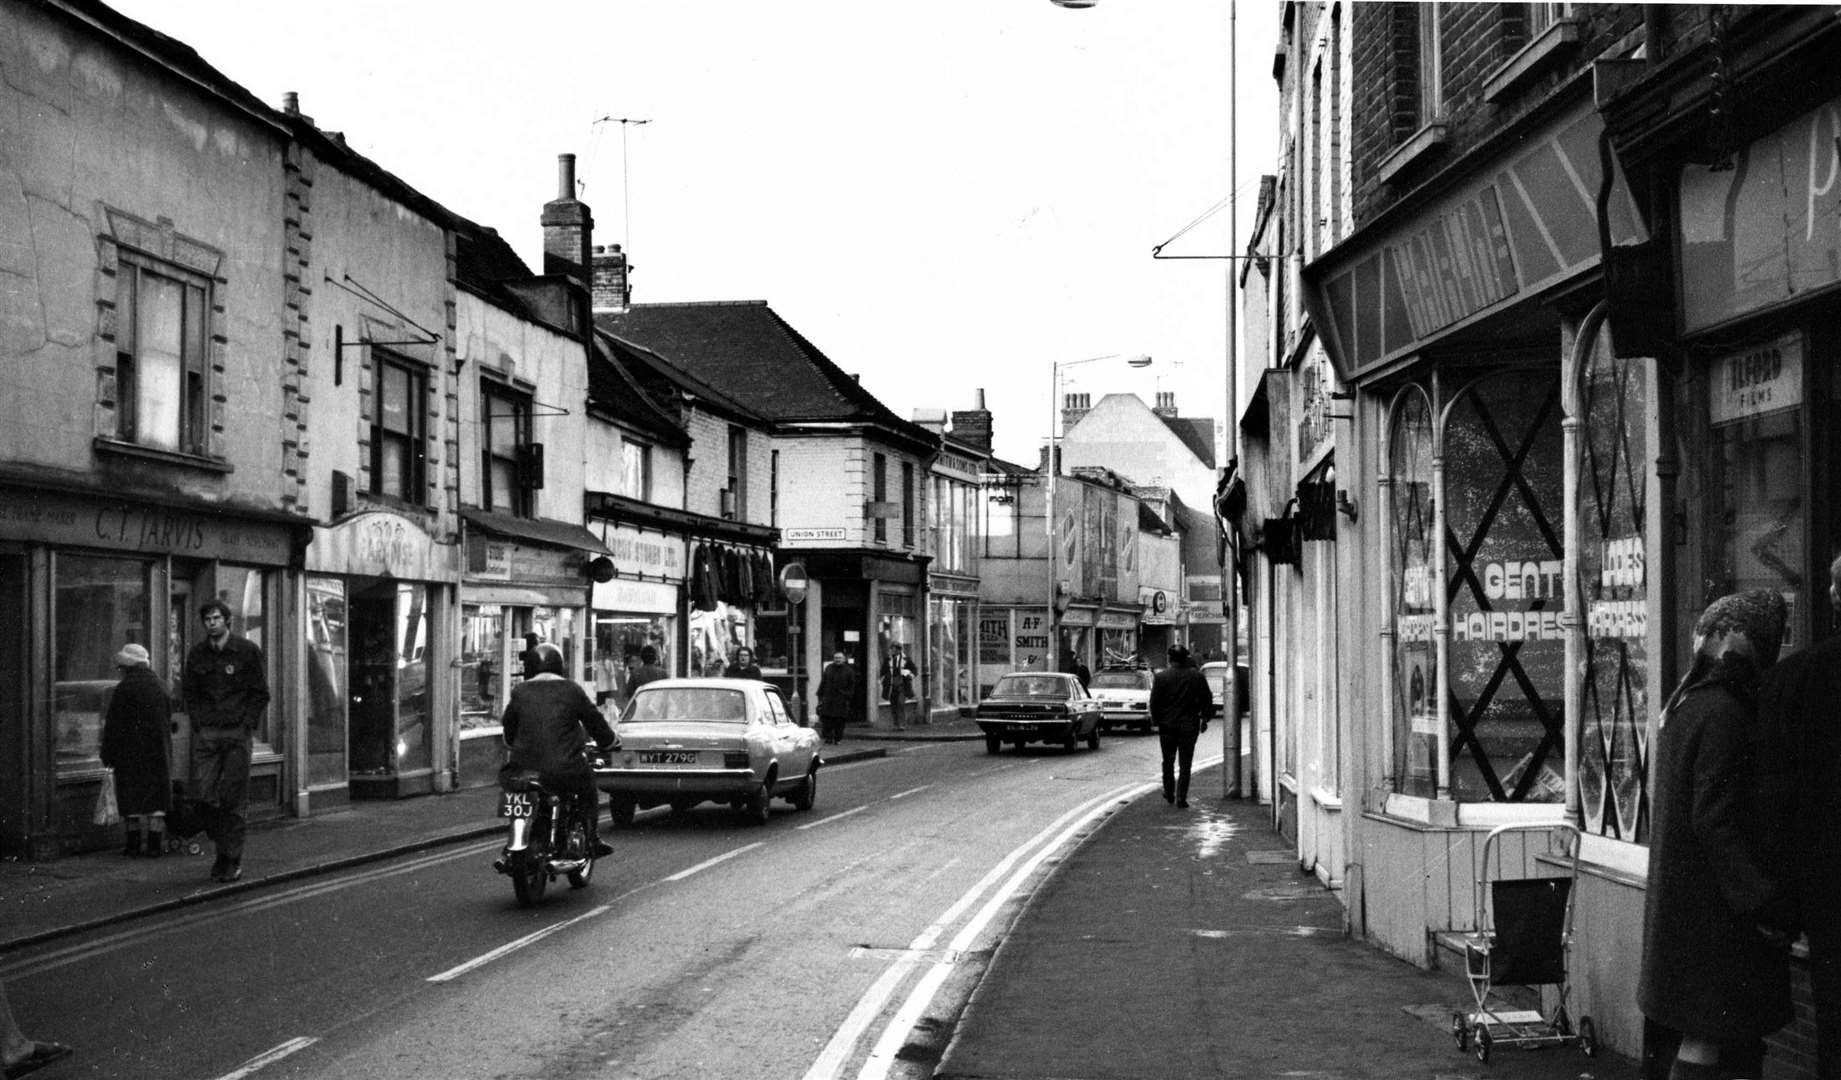 Chatham High Street looking towards the river from opposite the Ritz cinema area before Union Street (pictured on the left) was redeveloped. Undated file picture c1960s